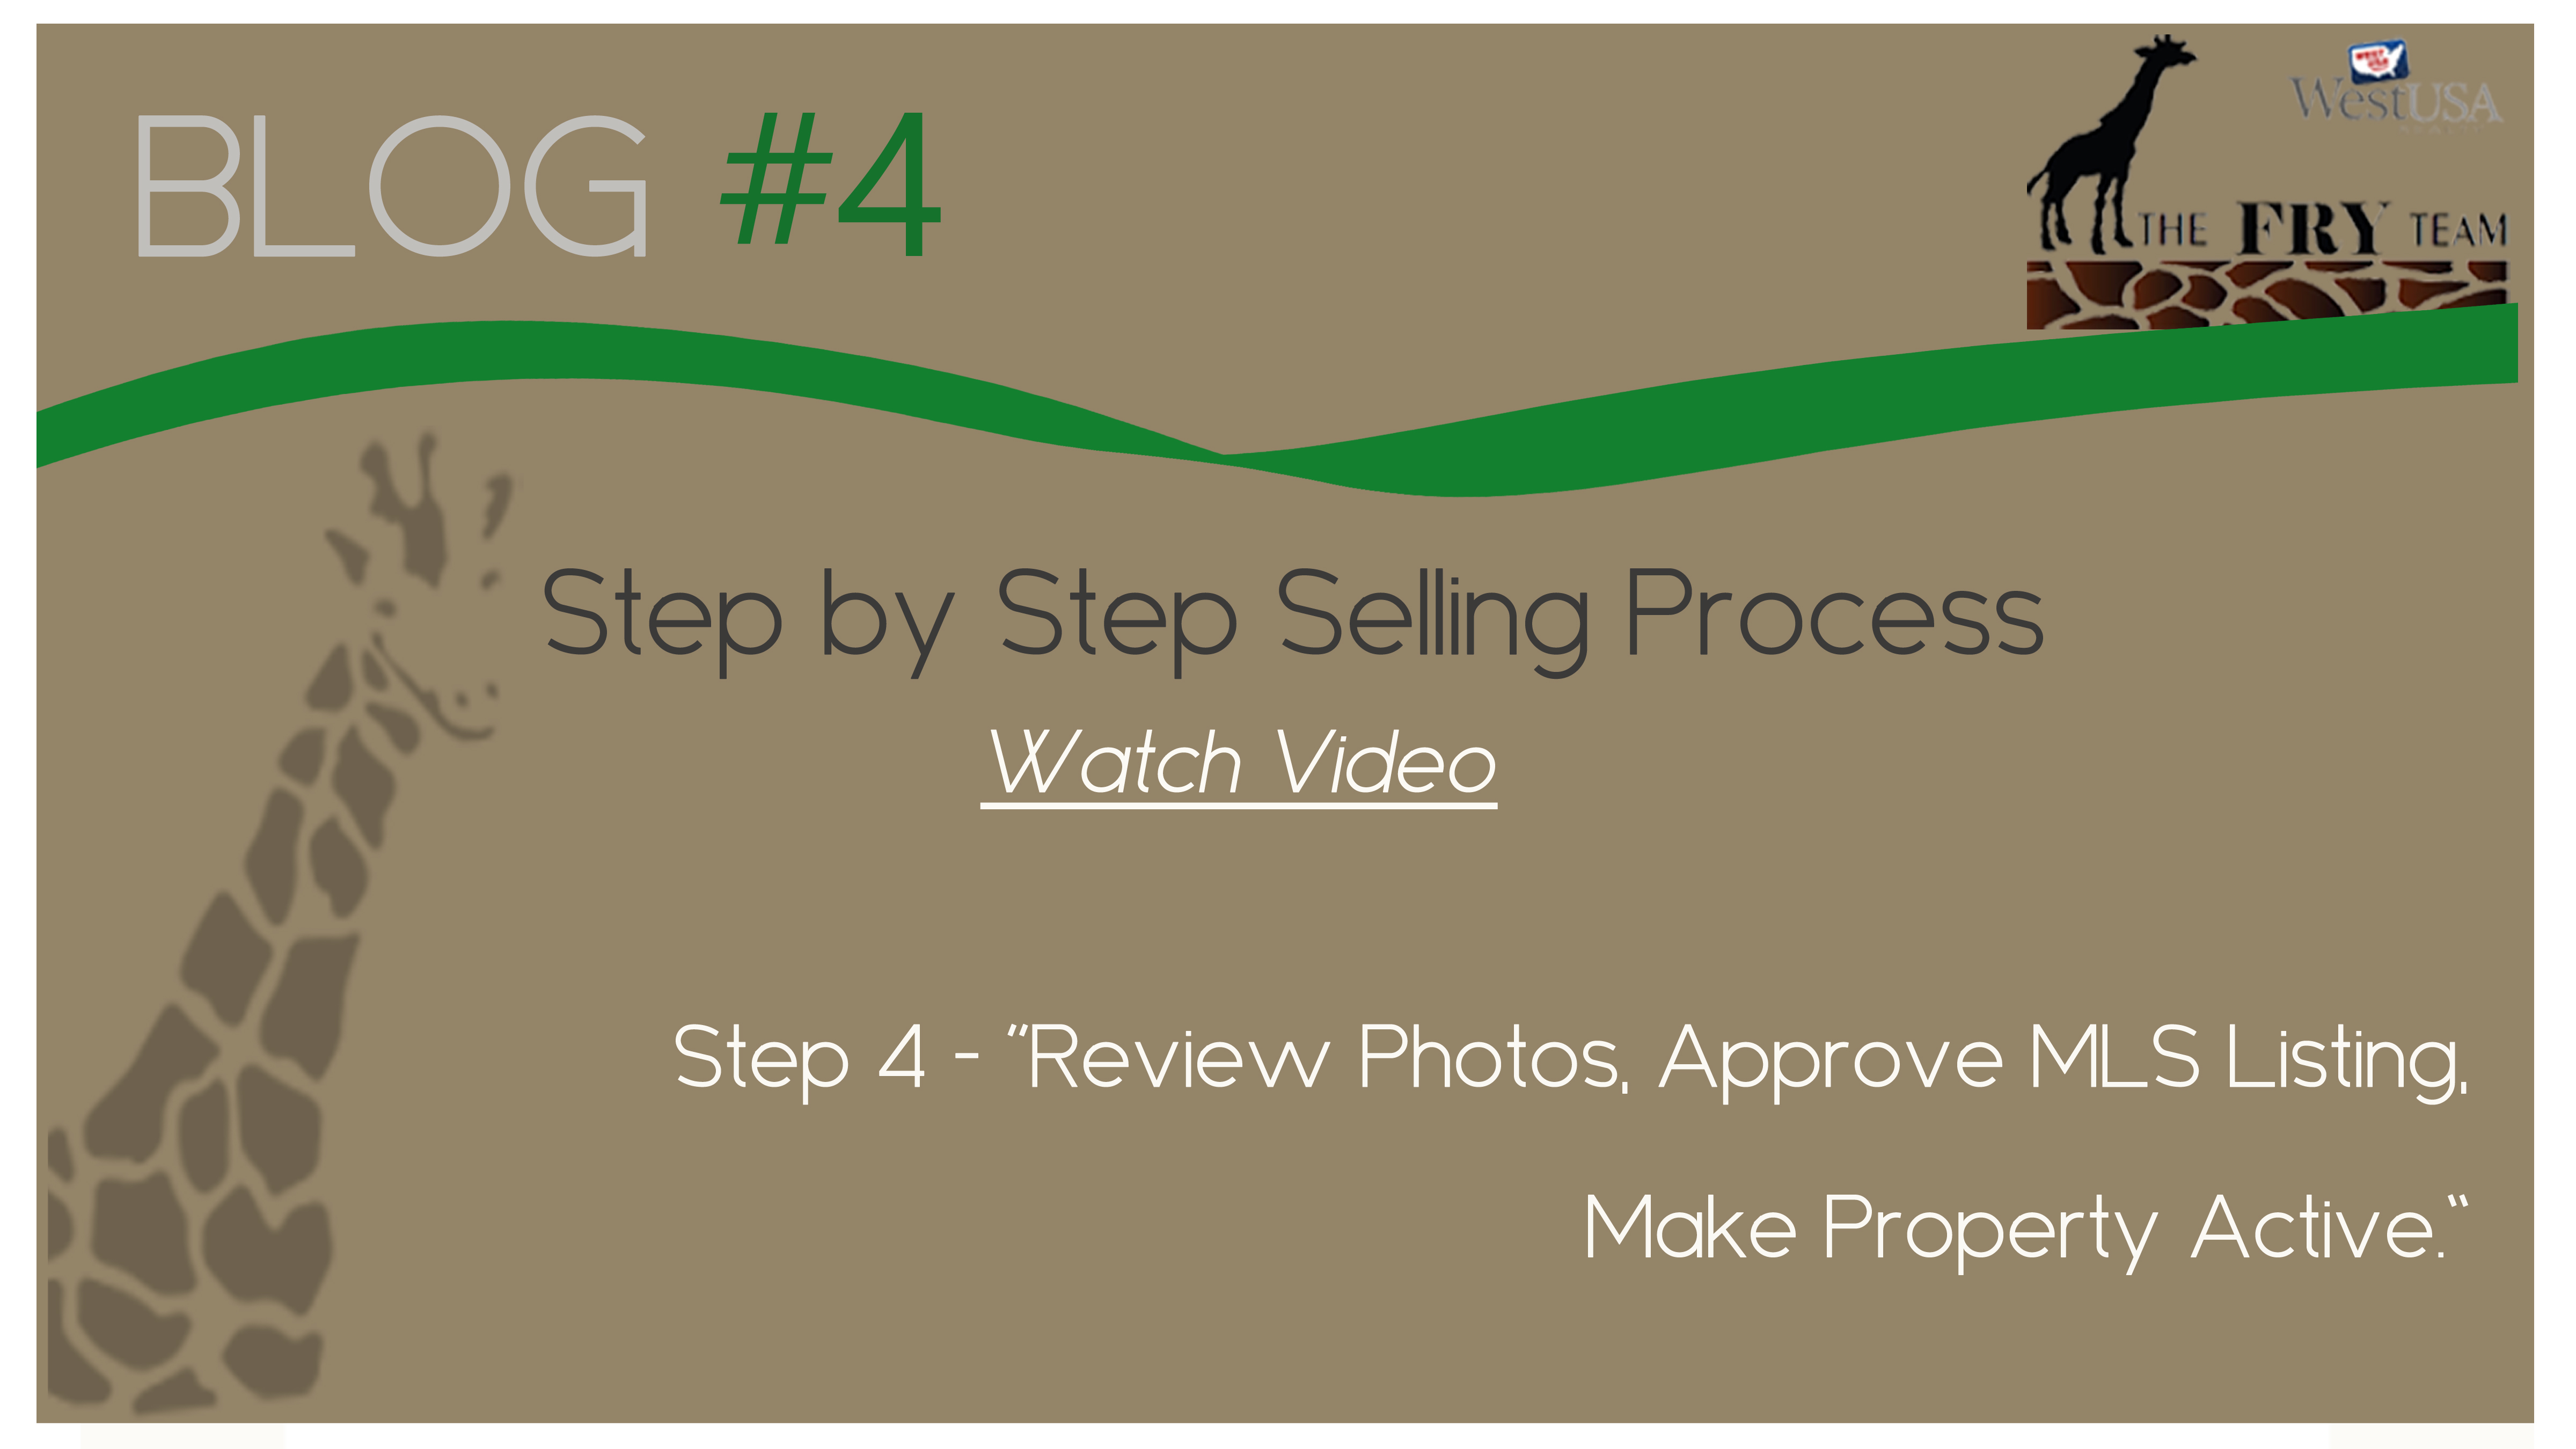 Step 4 – Review Photos, Approve MLS Listing, Make Property Active